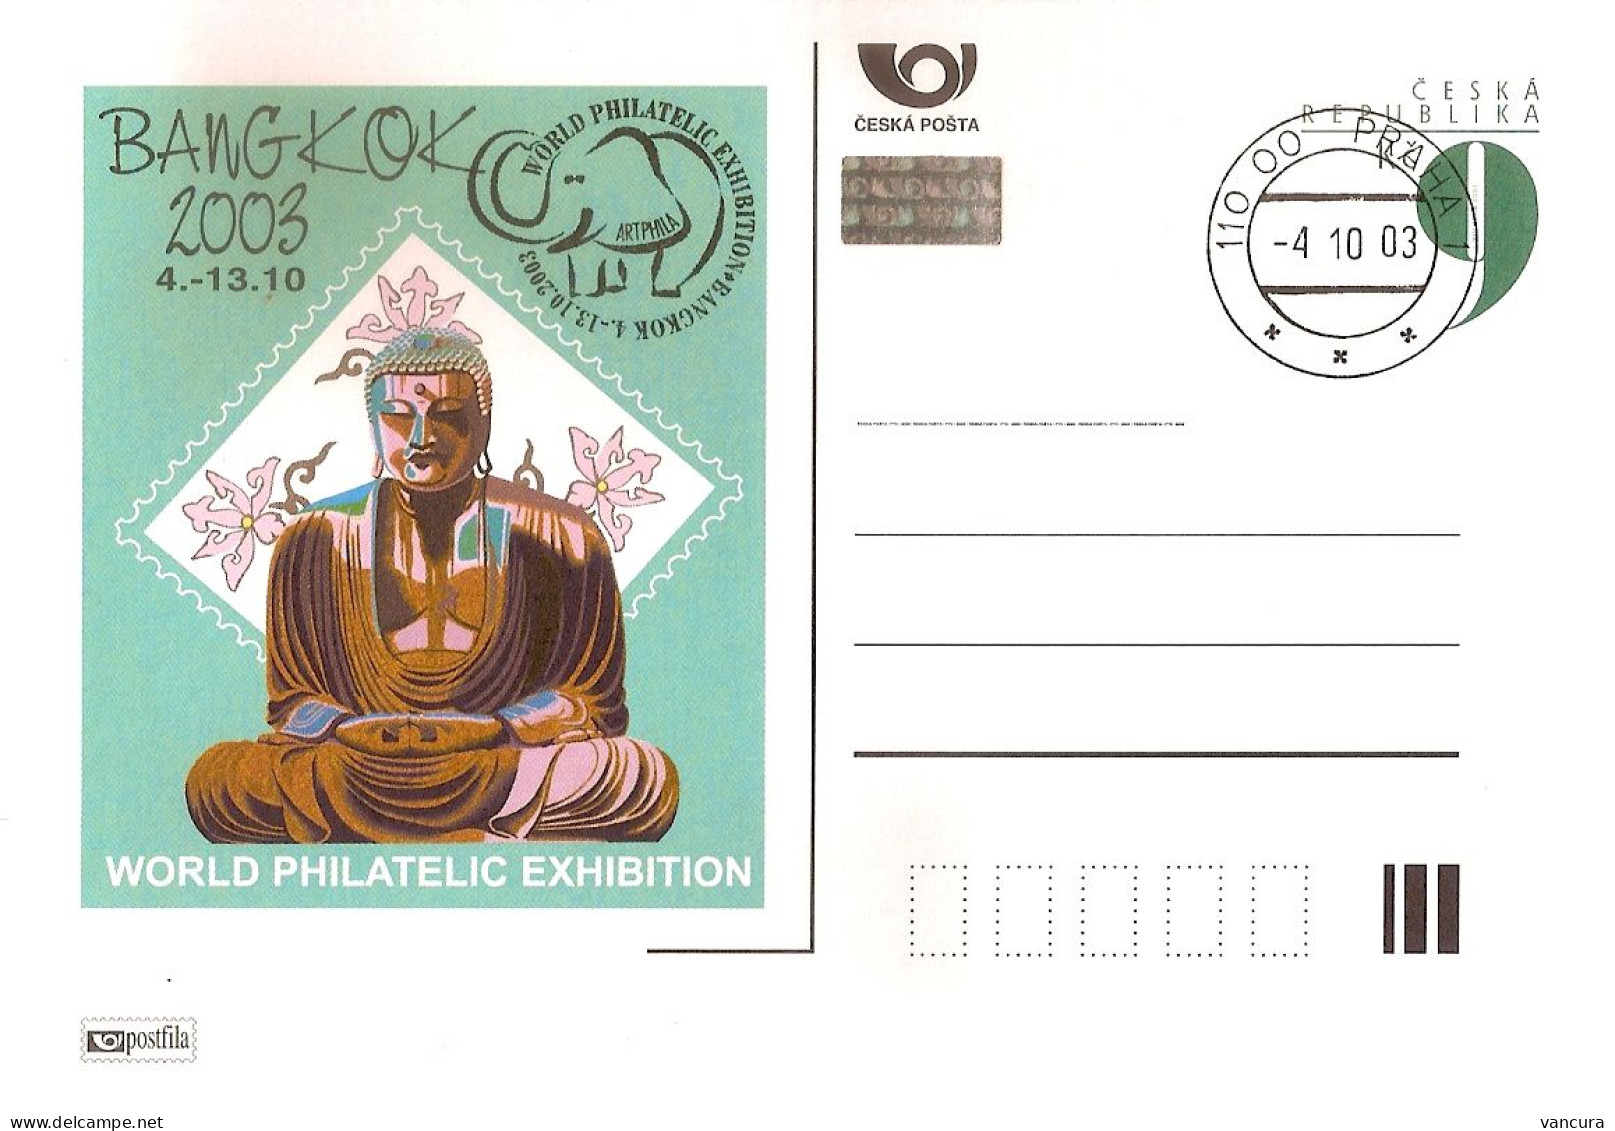 CDV A 92 Czech Republic Bangkog Stamp Exhibition Buddha 2003 NOTICE THE POOR SCAN, BUT THE CARD IS O.K. - Cartes Postales